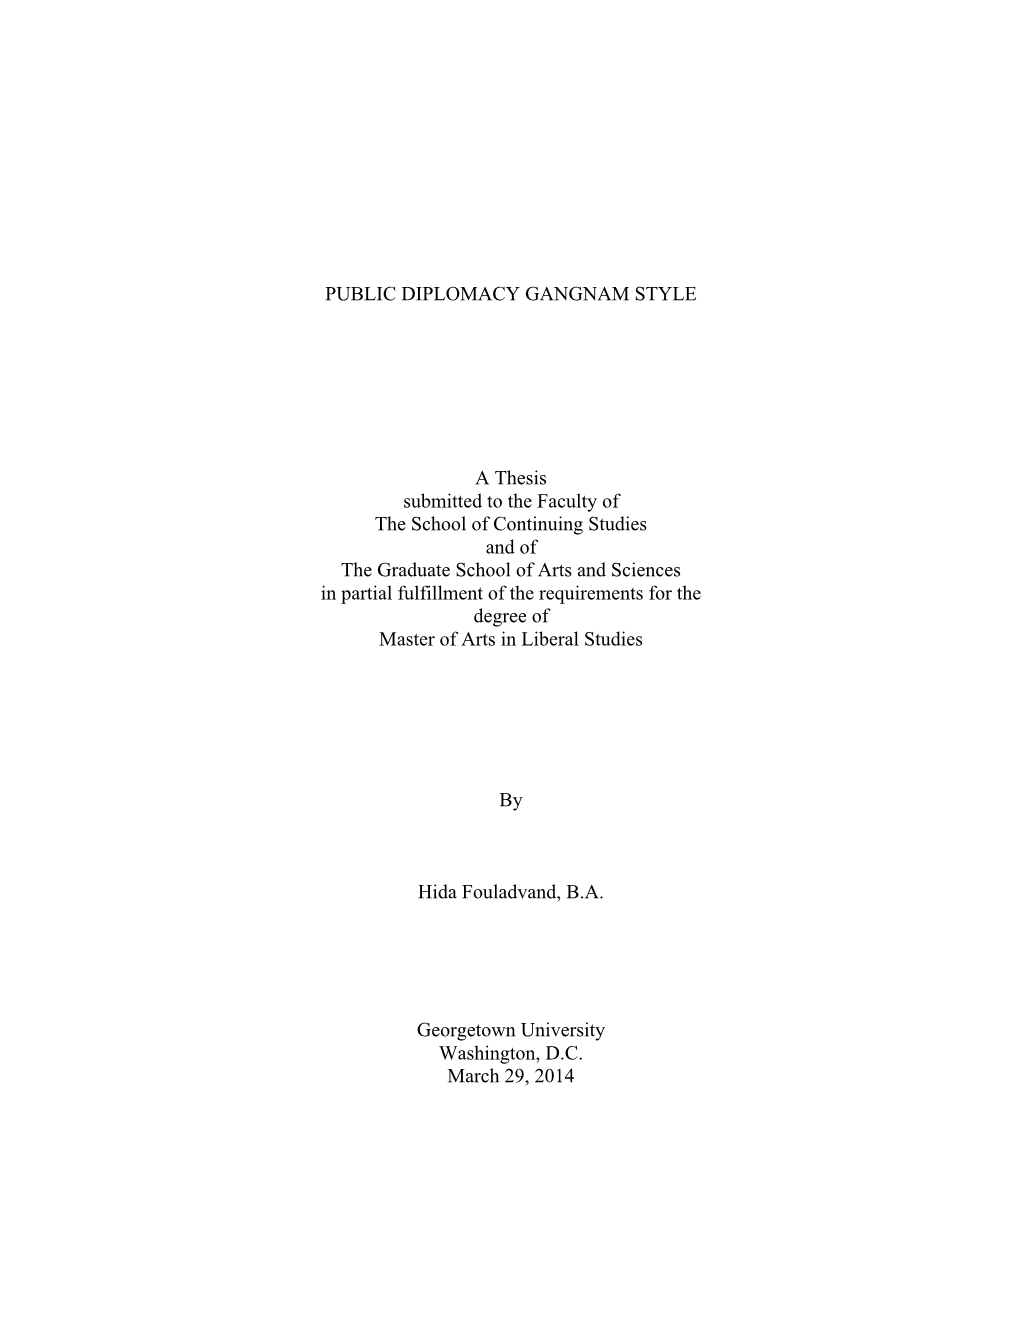 PUBLIC DIPLOMACY GANGNAM STYLE a Thesis Submitted to The